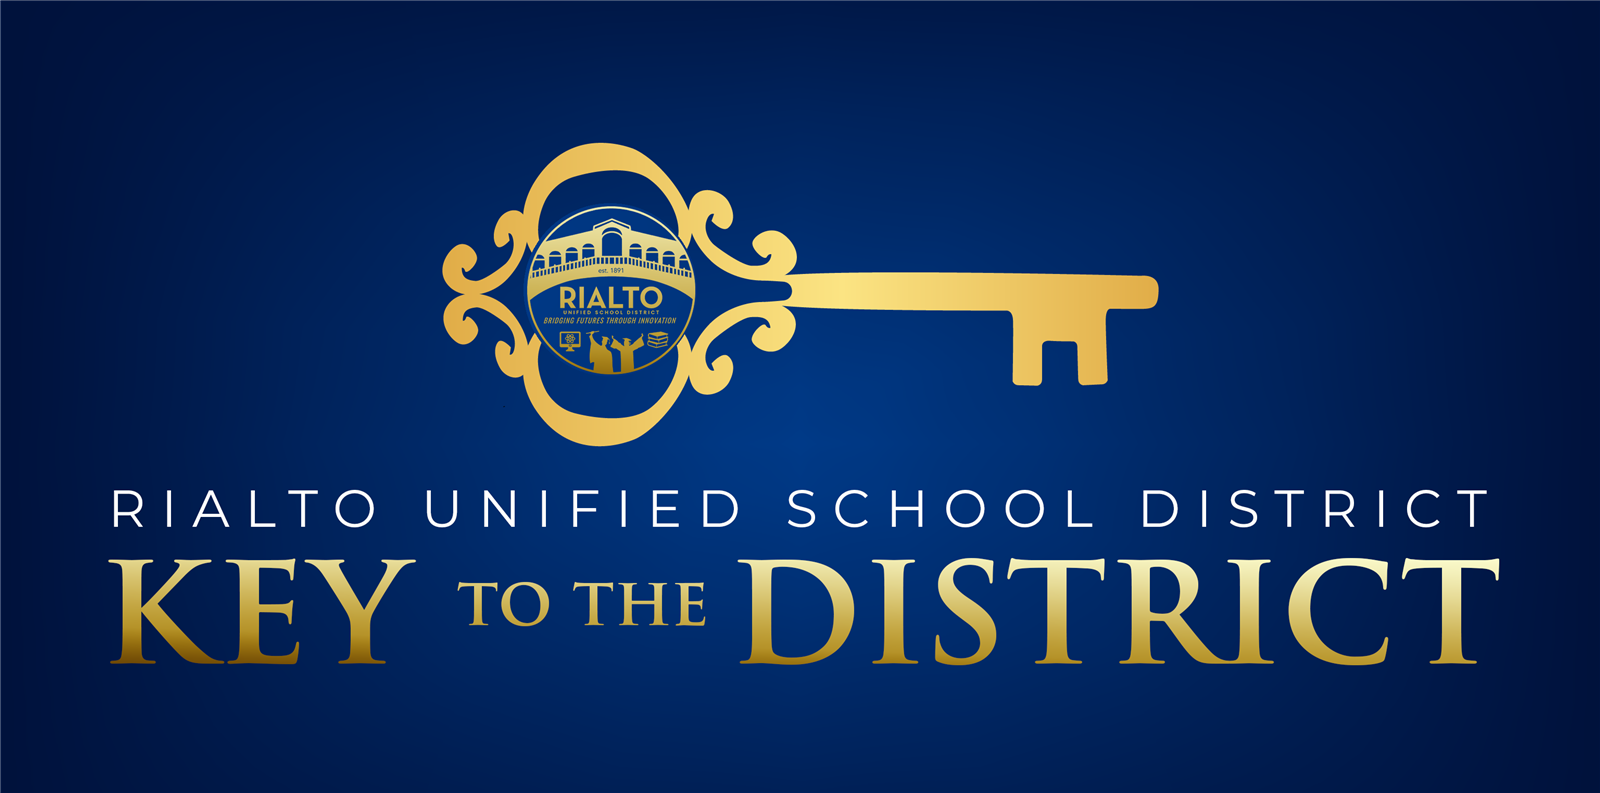 Rialto Unified School District Key to the District logo